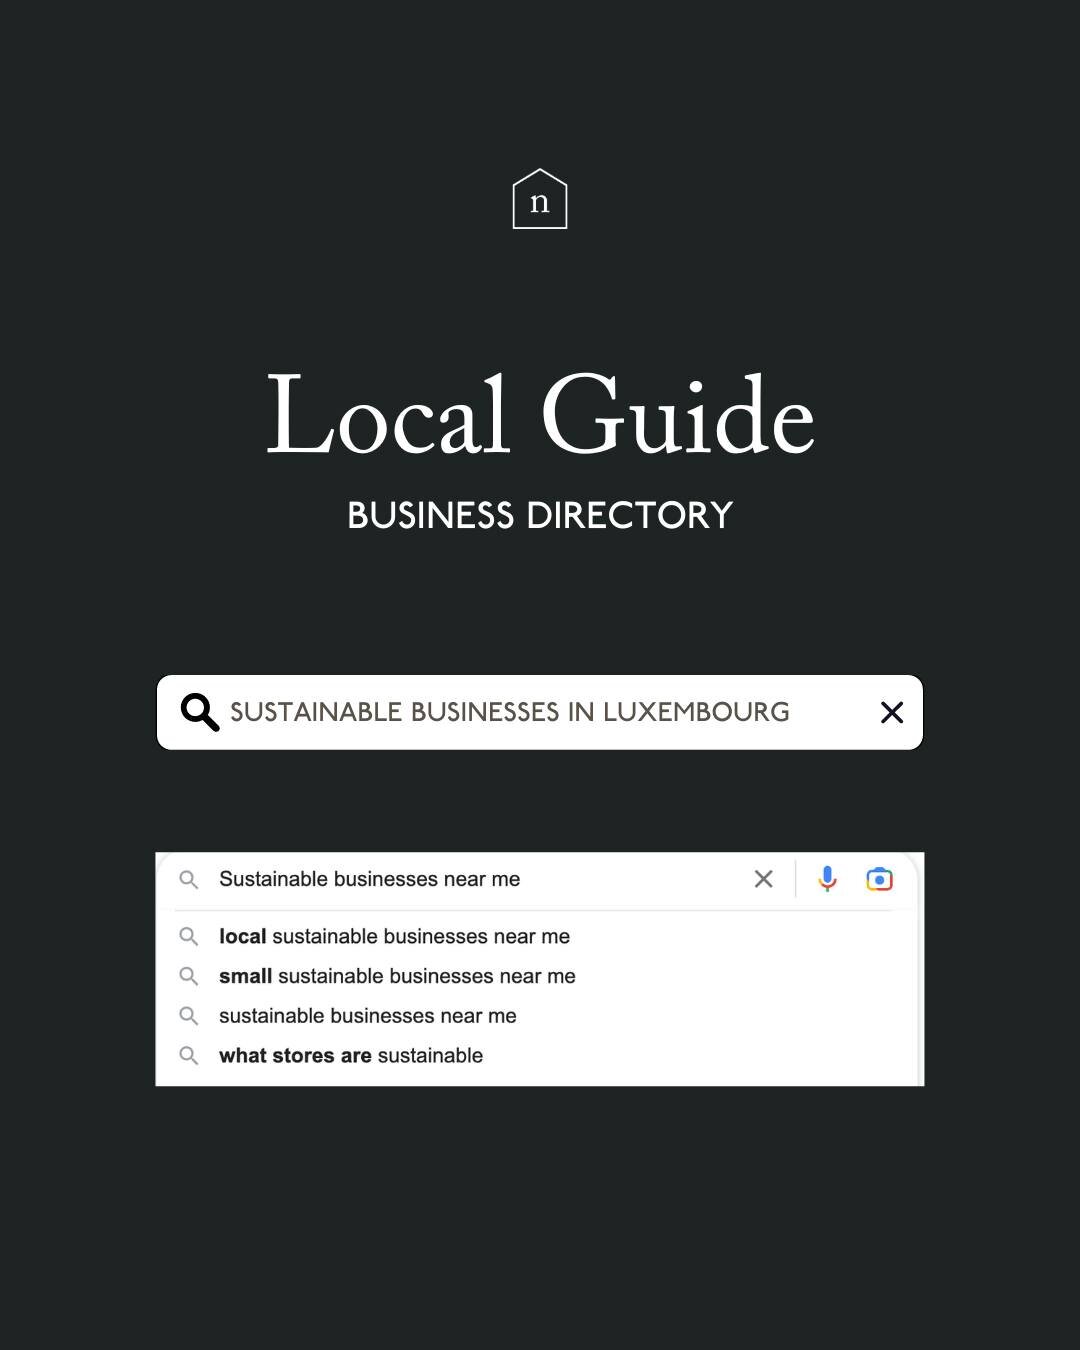 EN: We're excited to let you know that our Local Guide is now online! 

In it you'll find all of the inspiring local businesses and initiatives that have featured in our first three issues of Neighbour Magazine, as well as on our blog and social medi